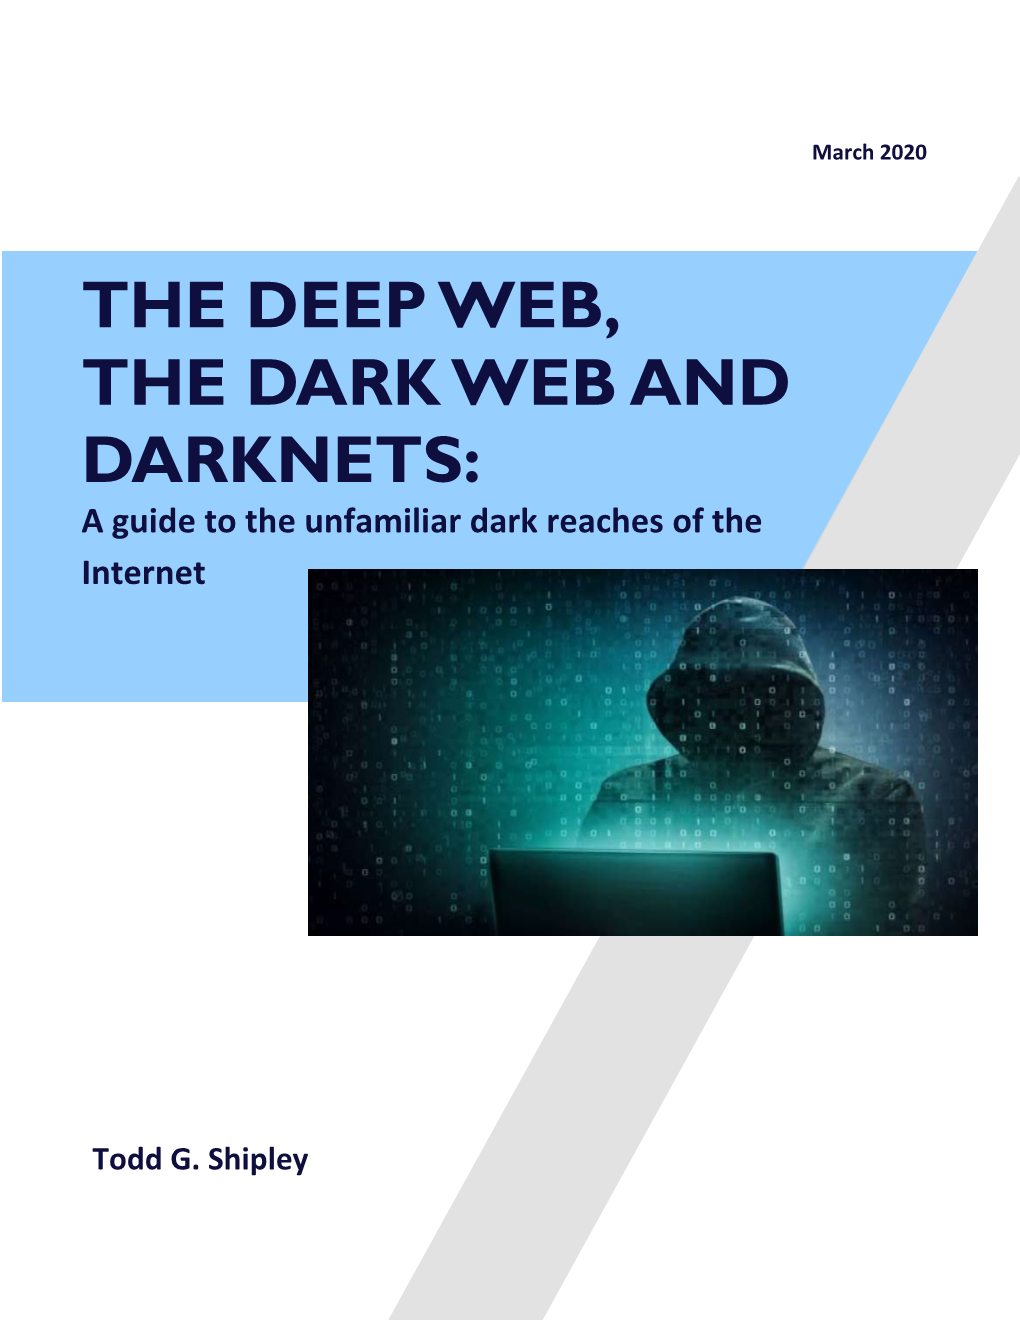 THE DEEP WEB, the DARK WEB and DARKNETS: a Guide to the Unfamiliar Dark Reaches of the Internet